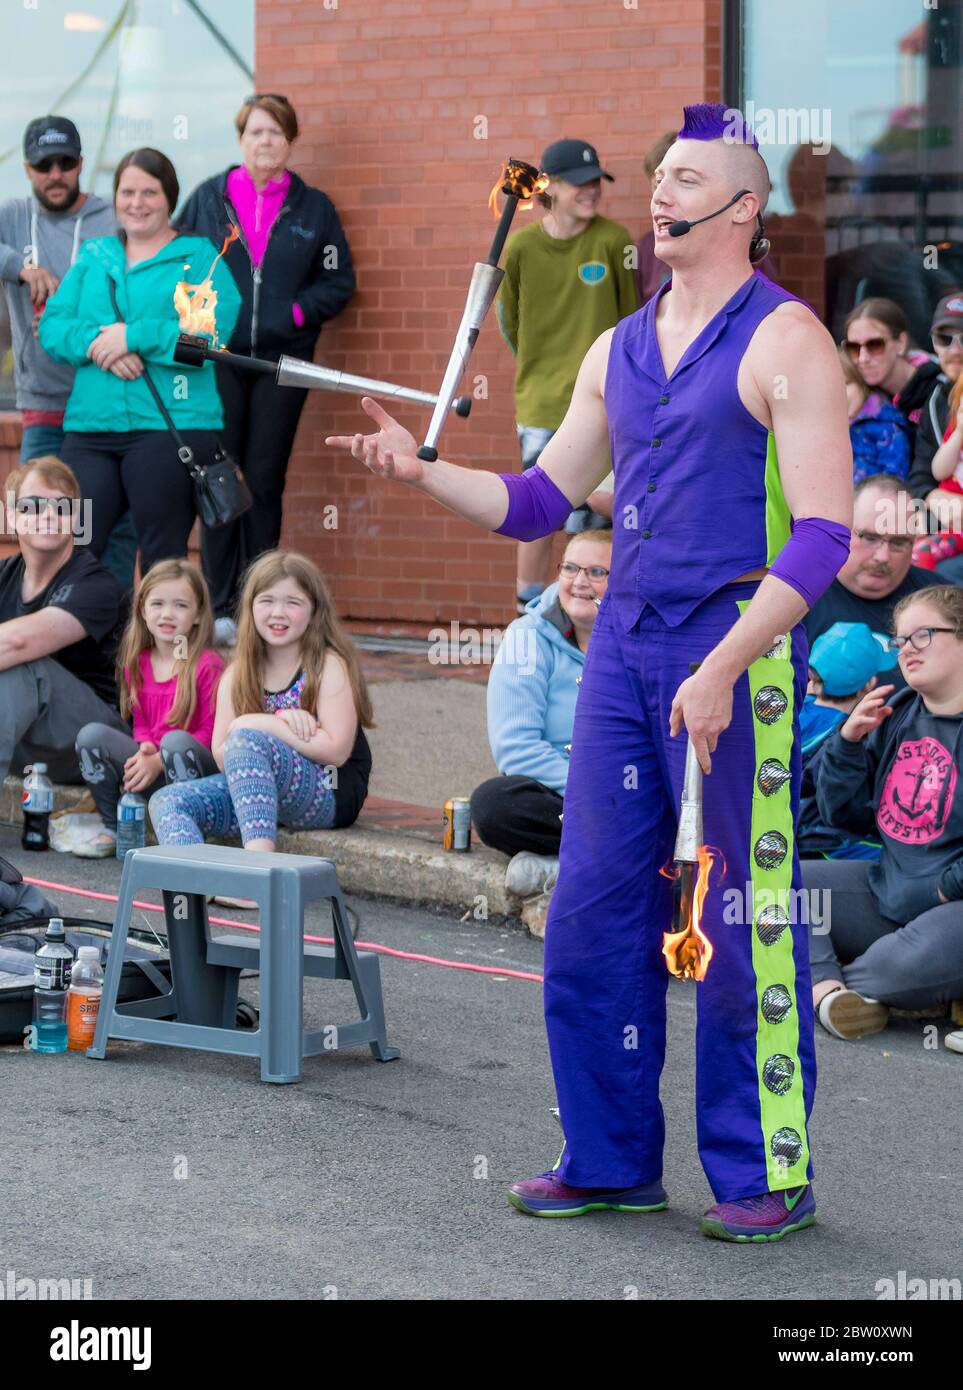 Saint John, New Brunswick, Canada - July 13, 2017: Annual Buskers Festival. A man with purple mohawk hair and dressed in purple juggles fire batons. Stock Photo